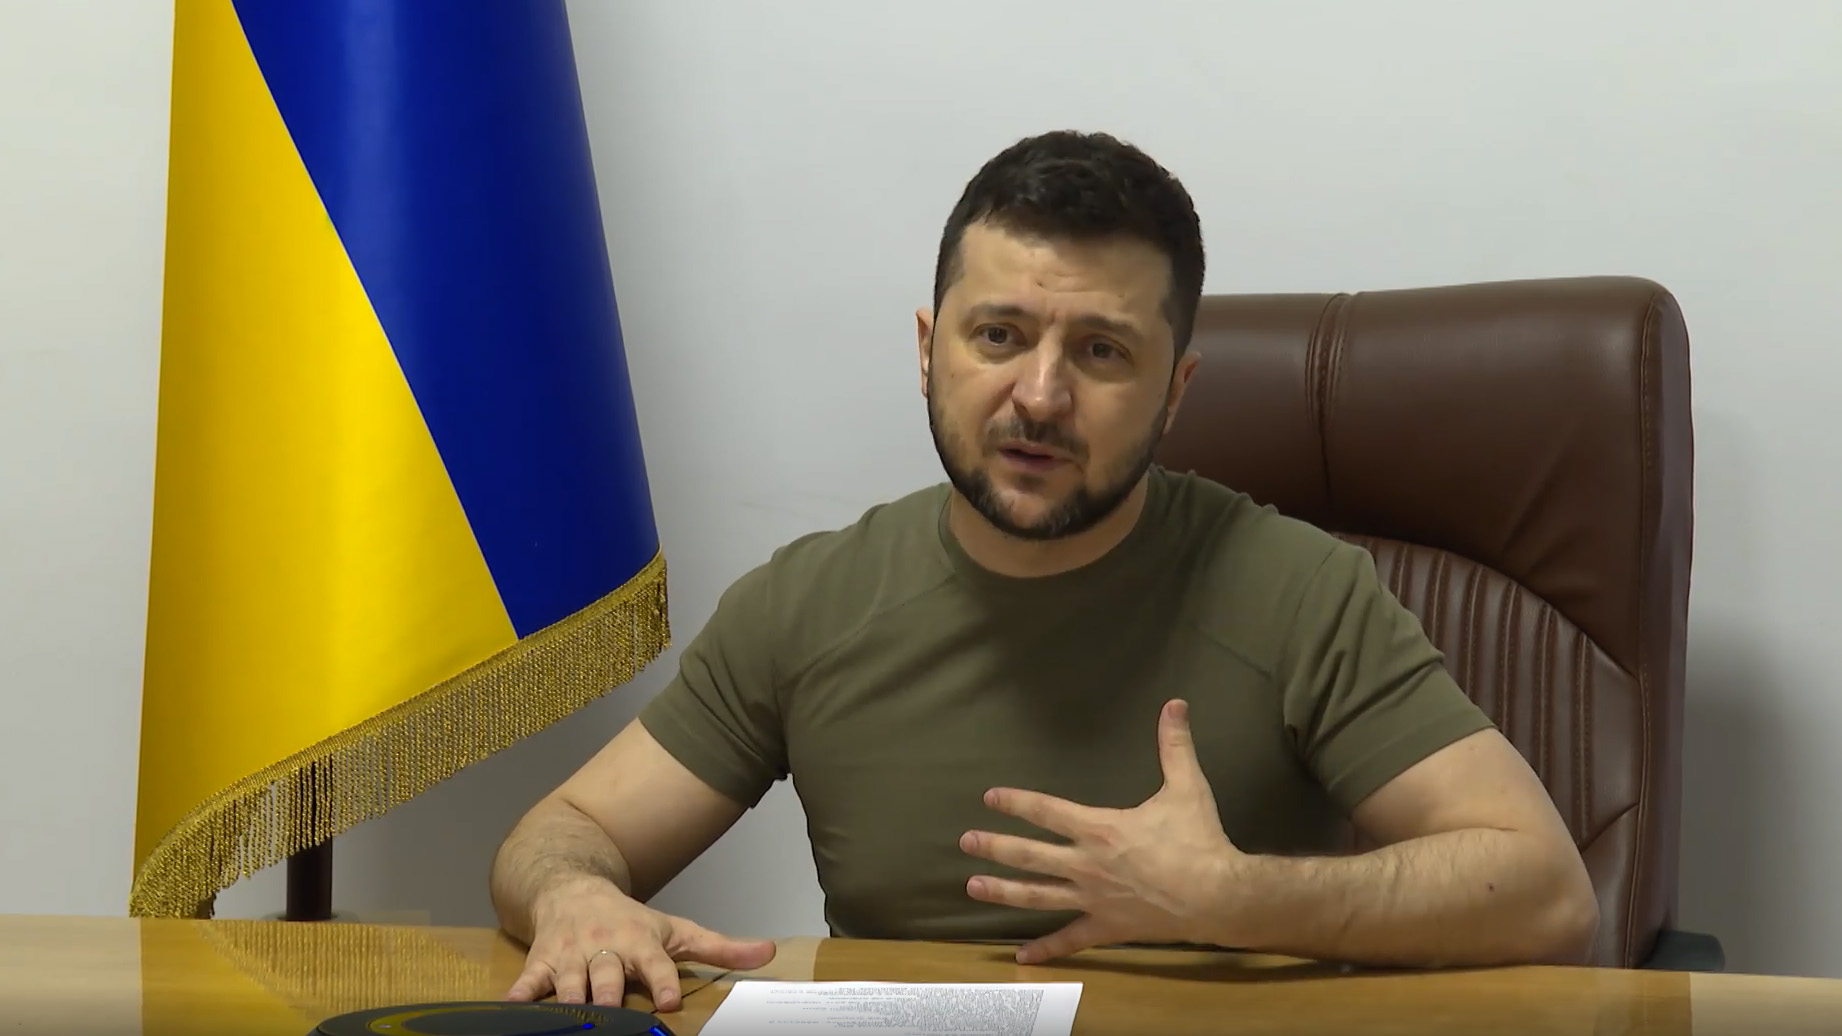 Ukrainian President Volodymyr Zelensky speaks to the European Council in a video posted to Facebook late Thursday night March 24. 